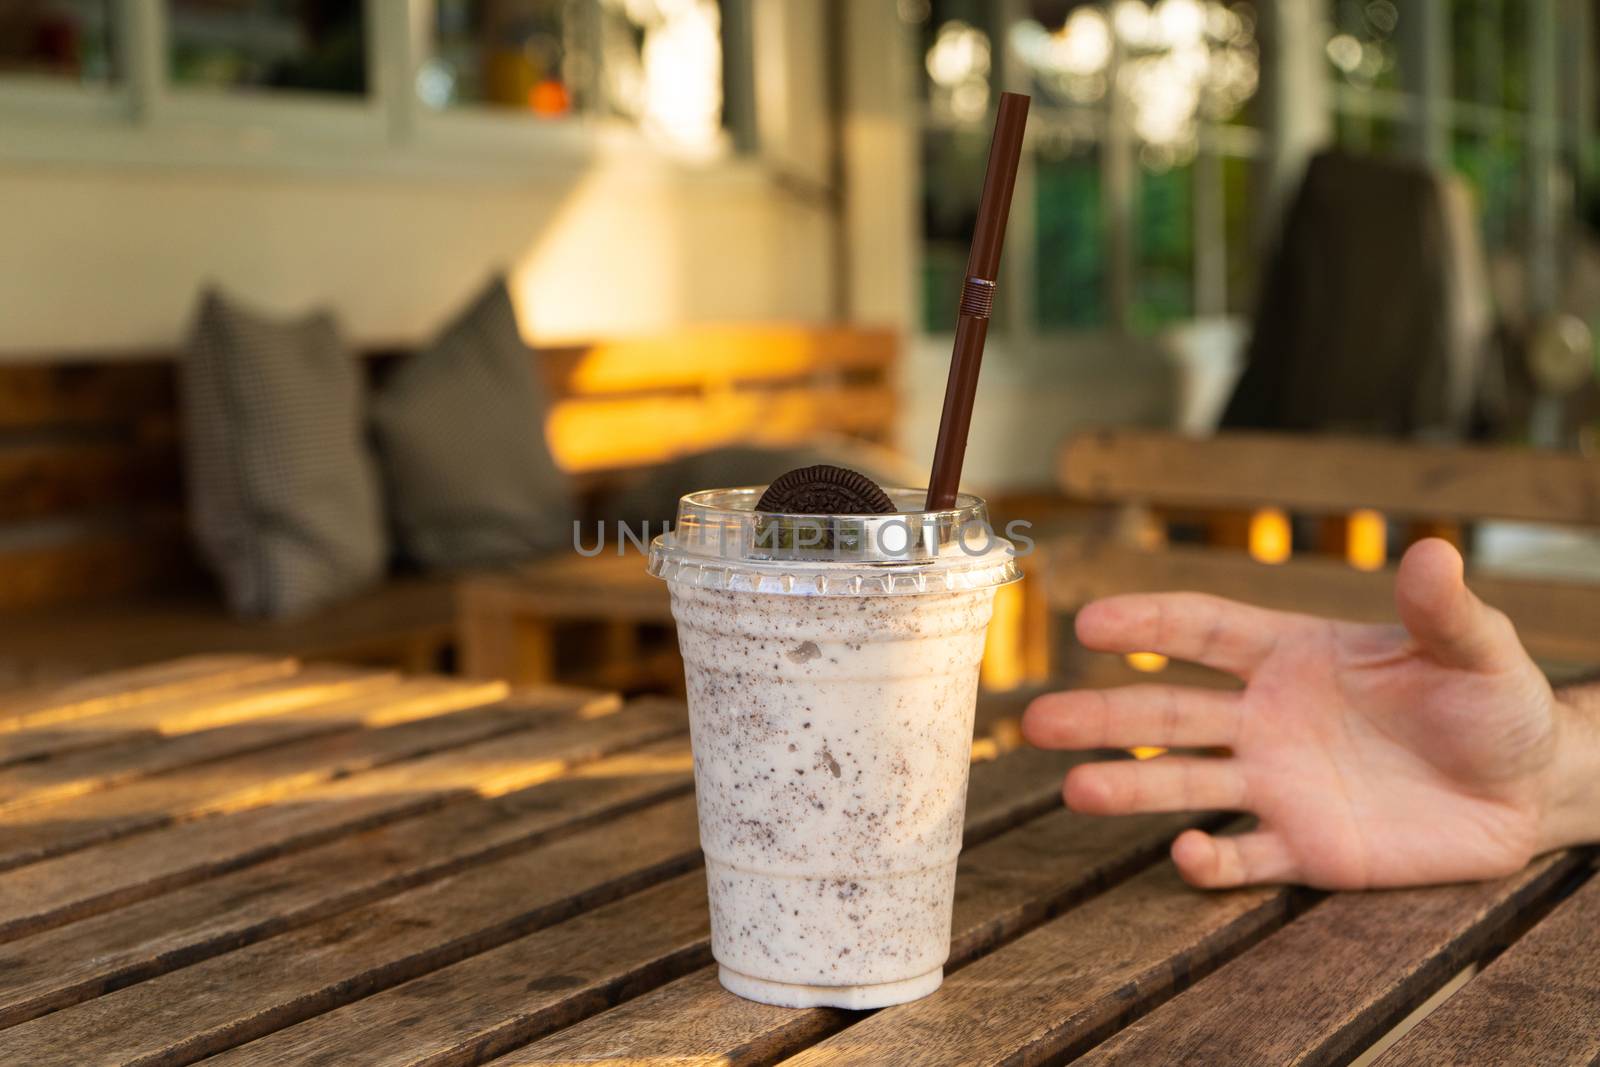 Milkshake with ice cream and oreo cookies. Cool and refreshing on a hot day.